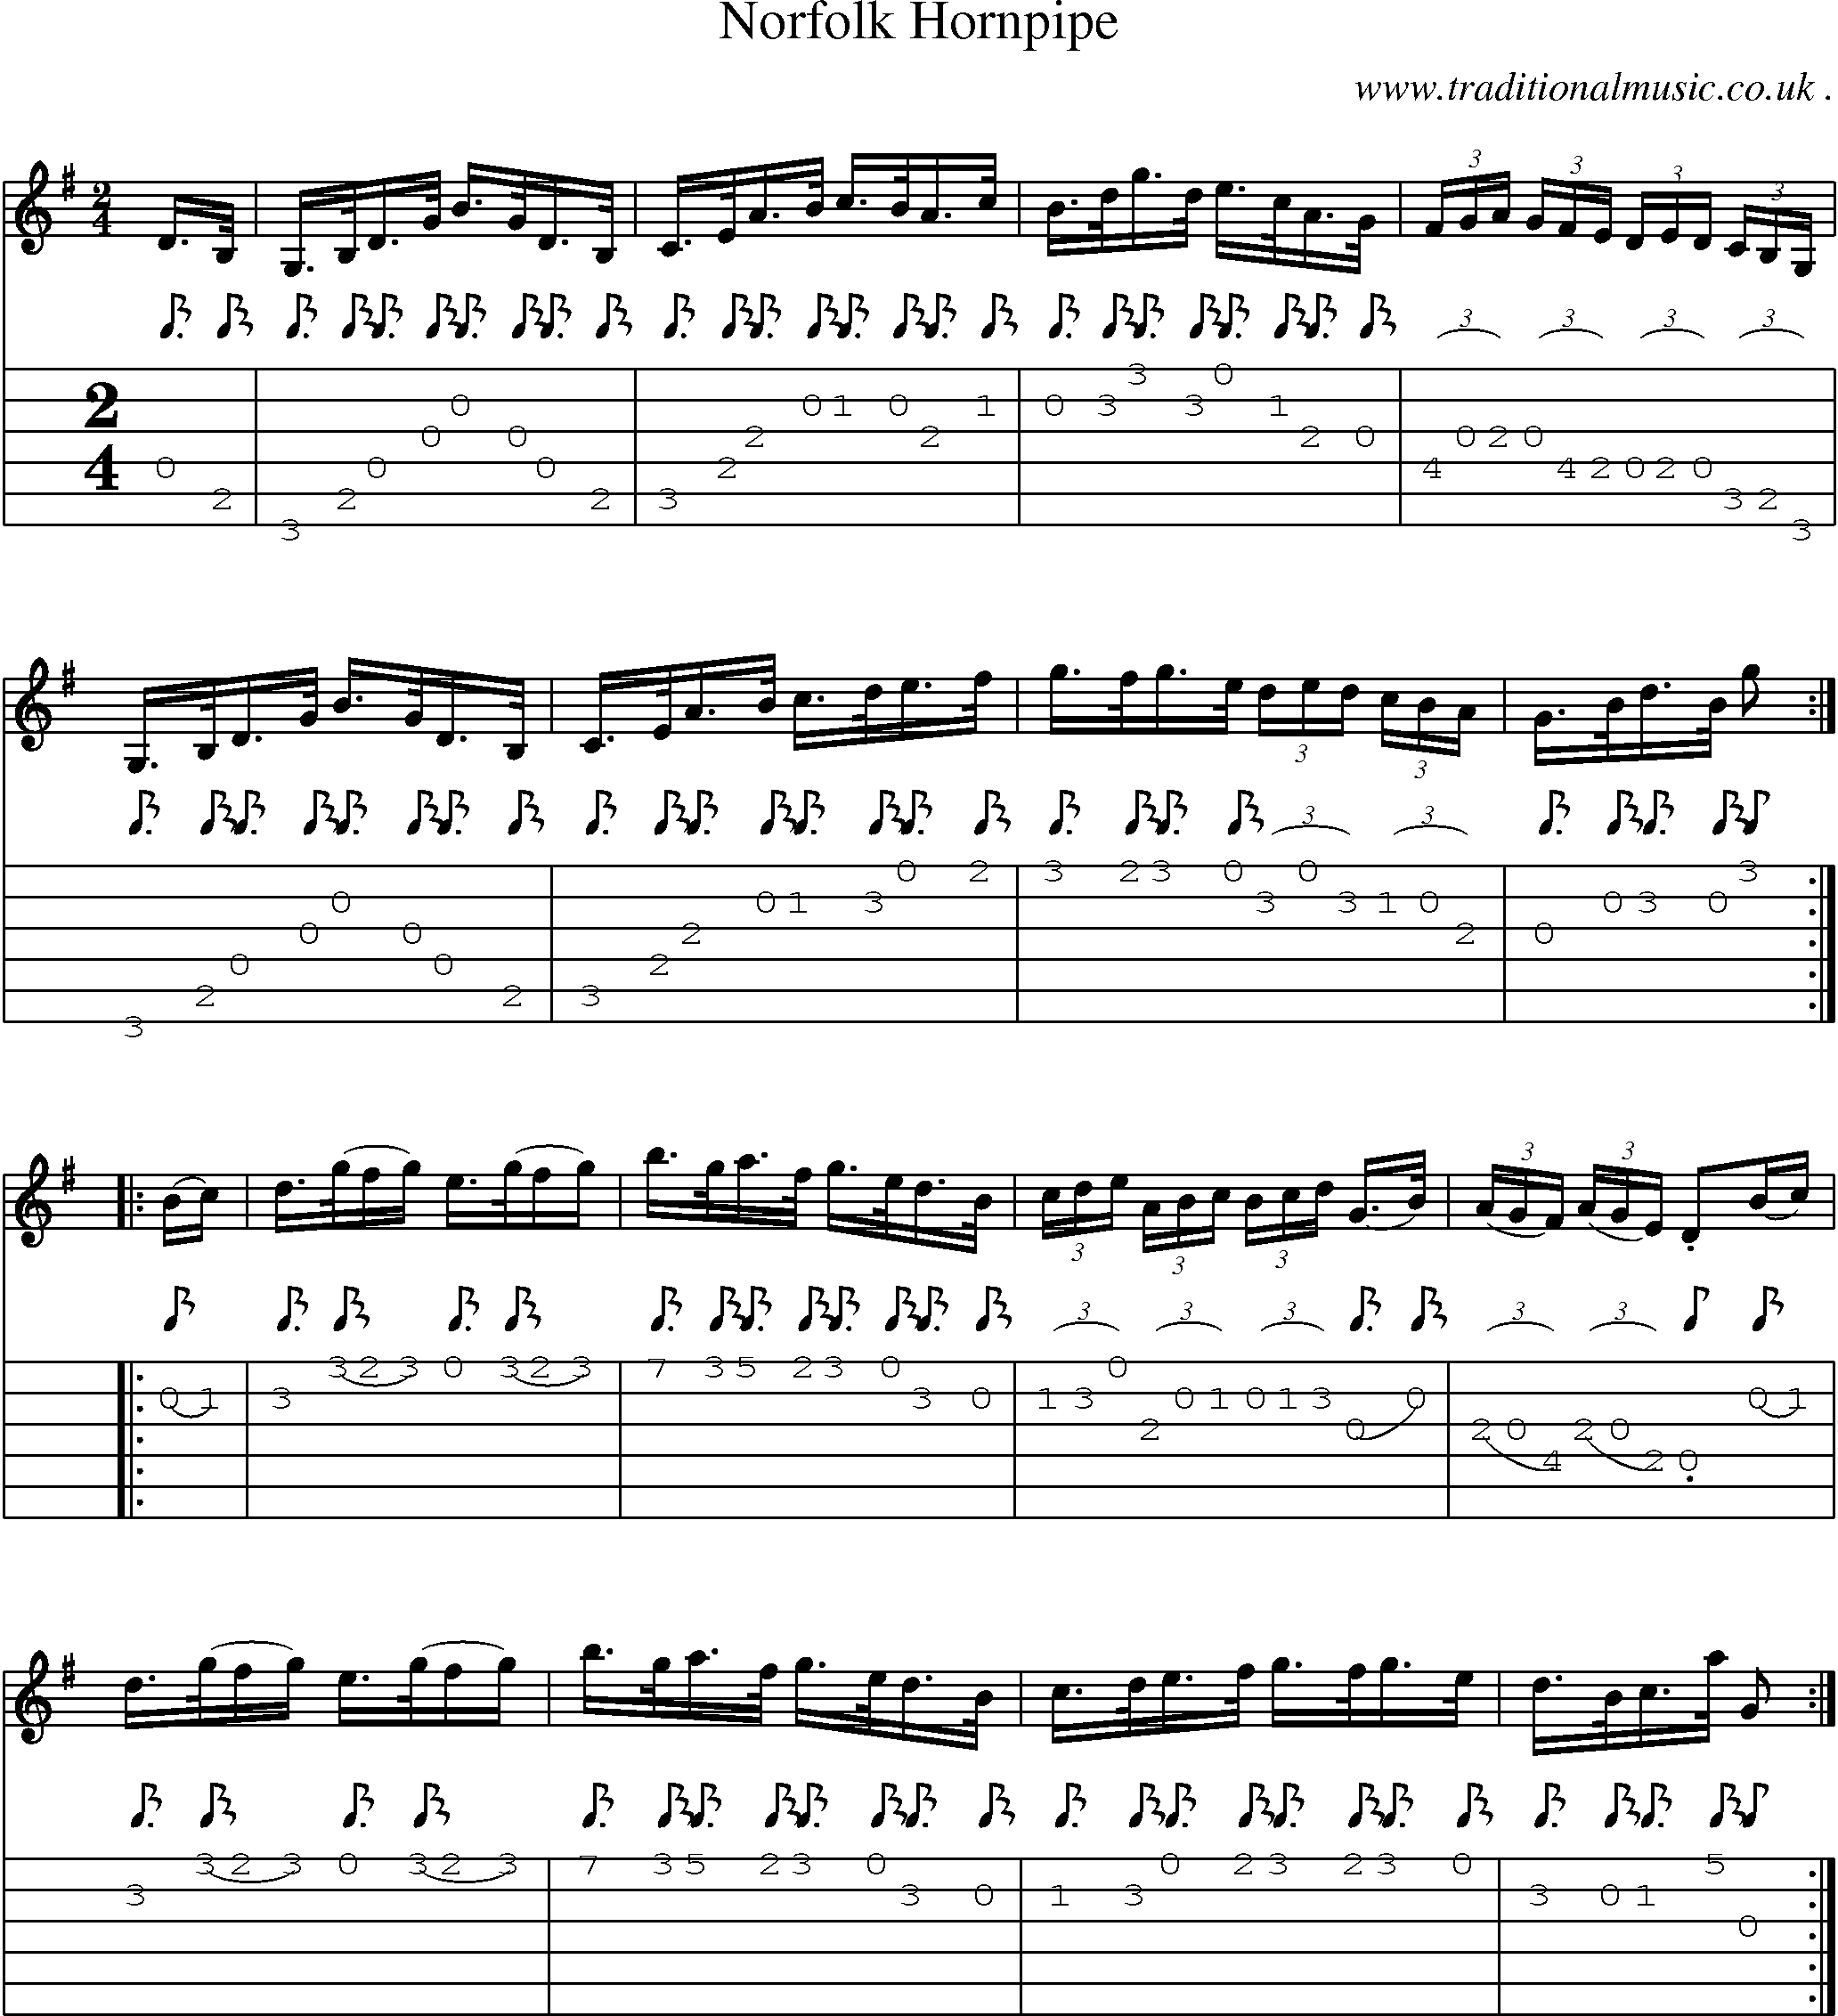 Sheet-Music and Guitar Tabs for Norfolk Hornpipe